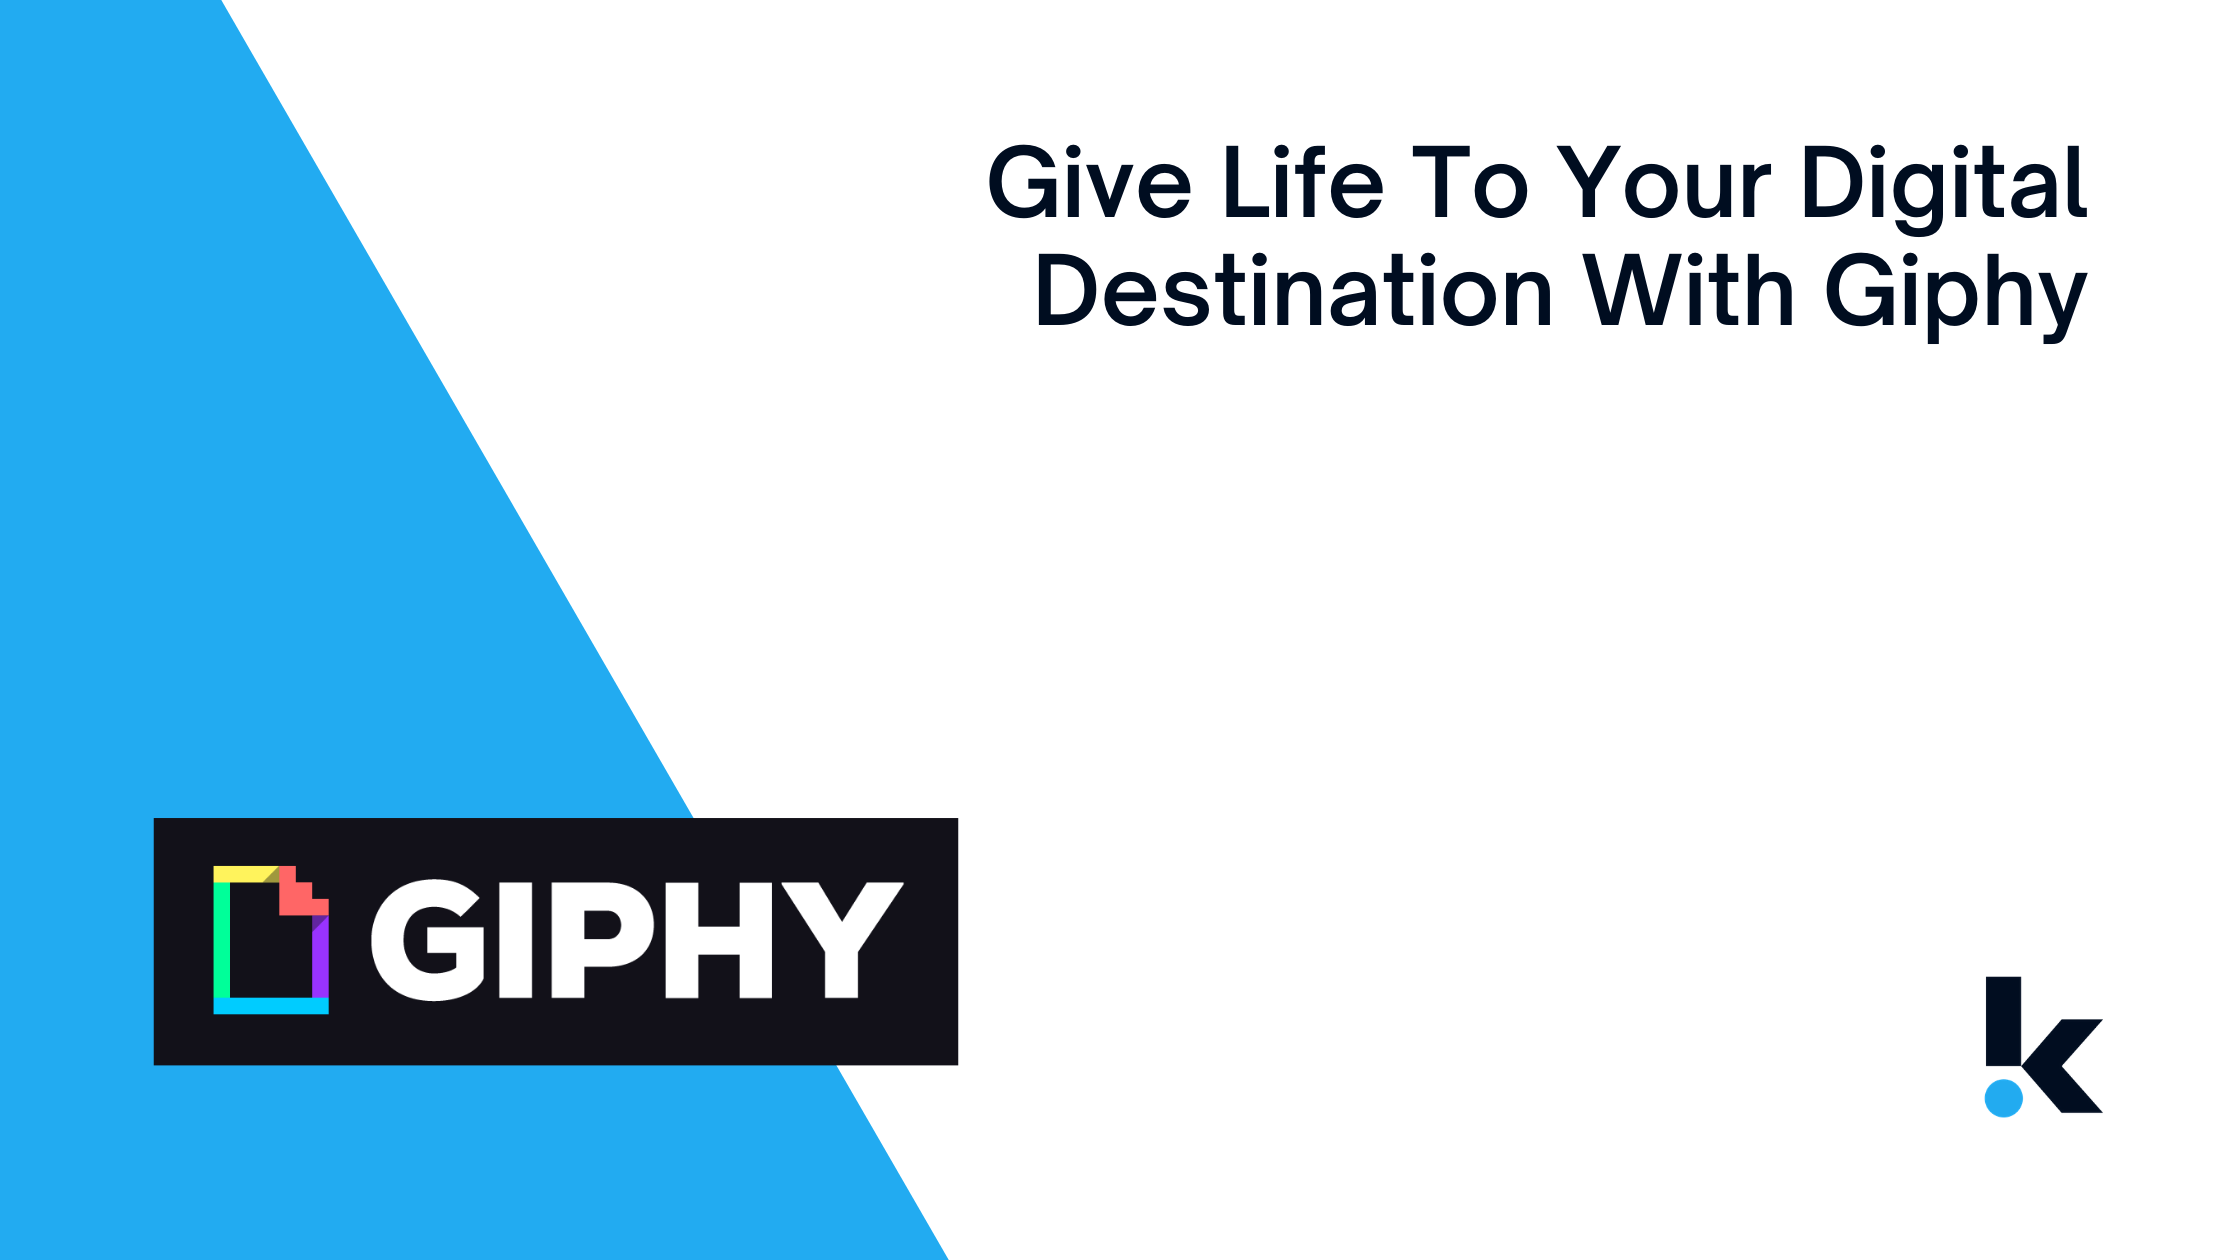 With Komo's new Giphy integration, users can now add GIFs to make their digital destination more lively and vibrant. Read this blog post to find out more!